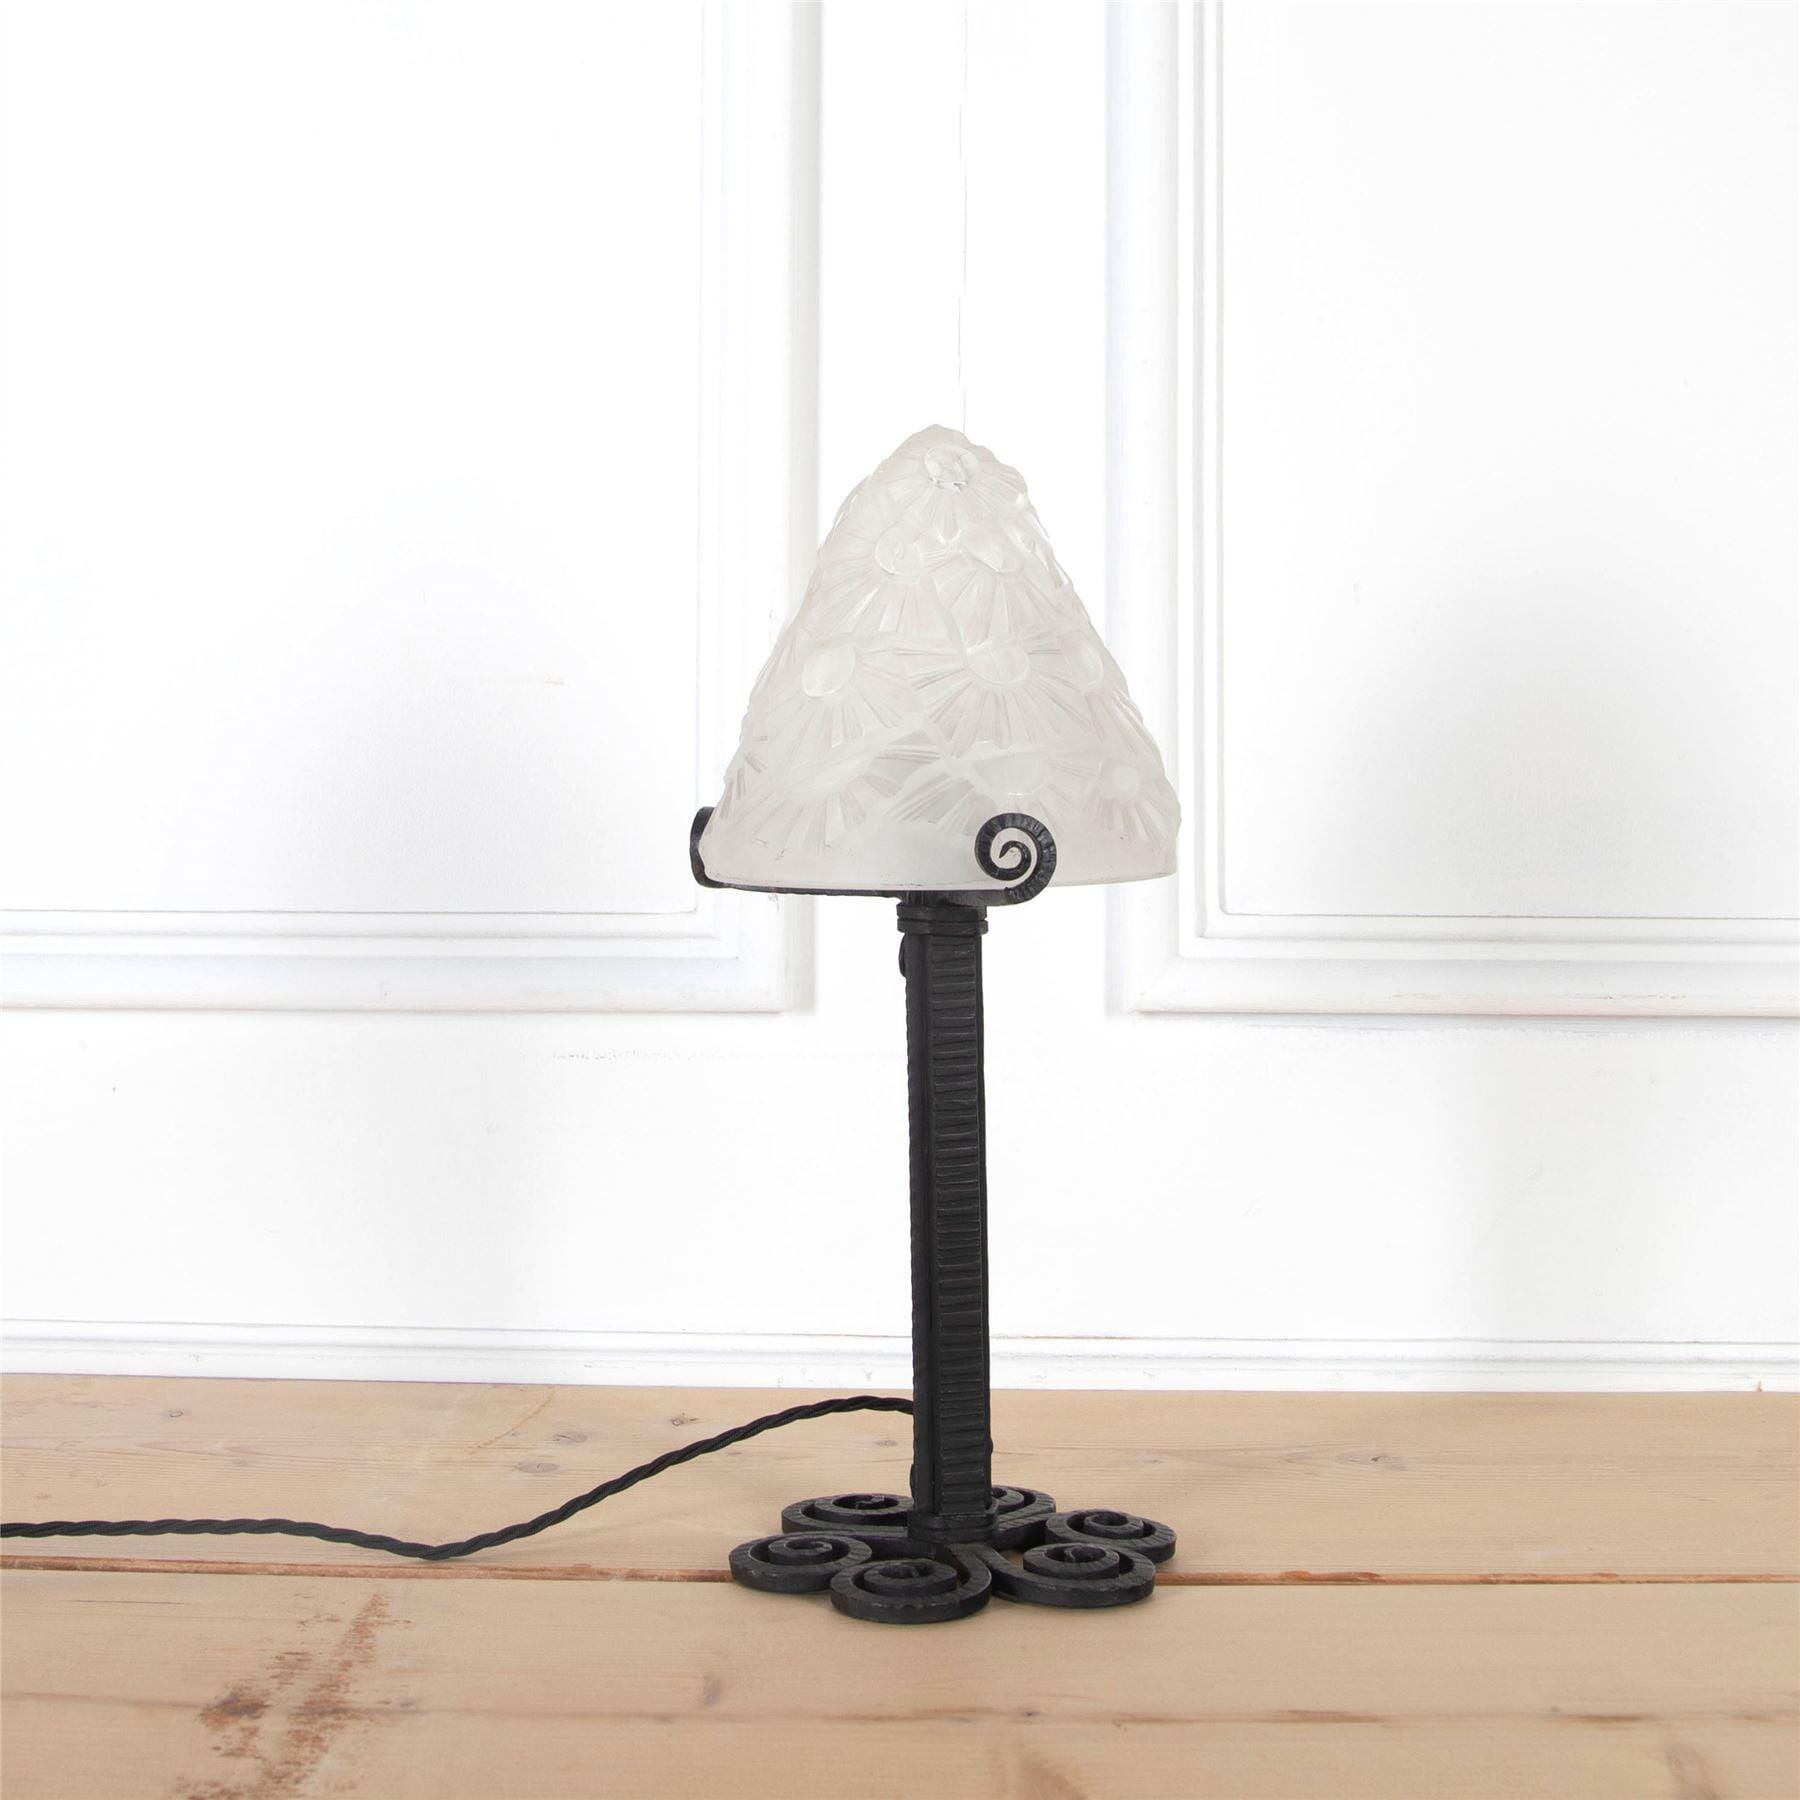 Small Art Deco Table Lamp By Degué, Small Iron Table Lamp